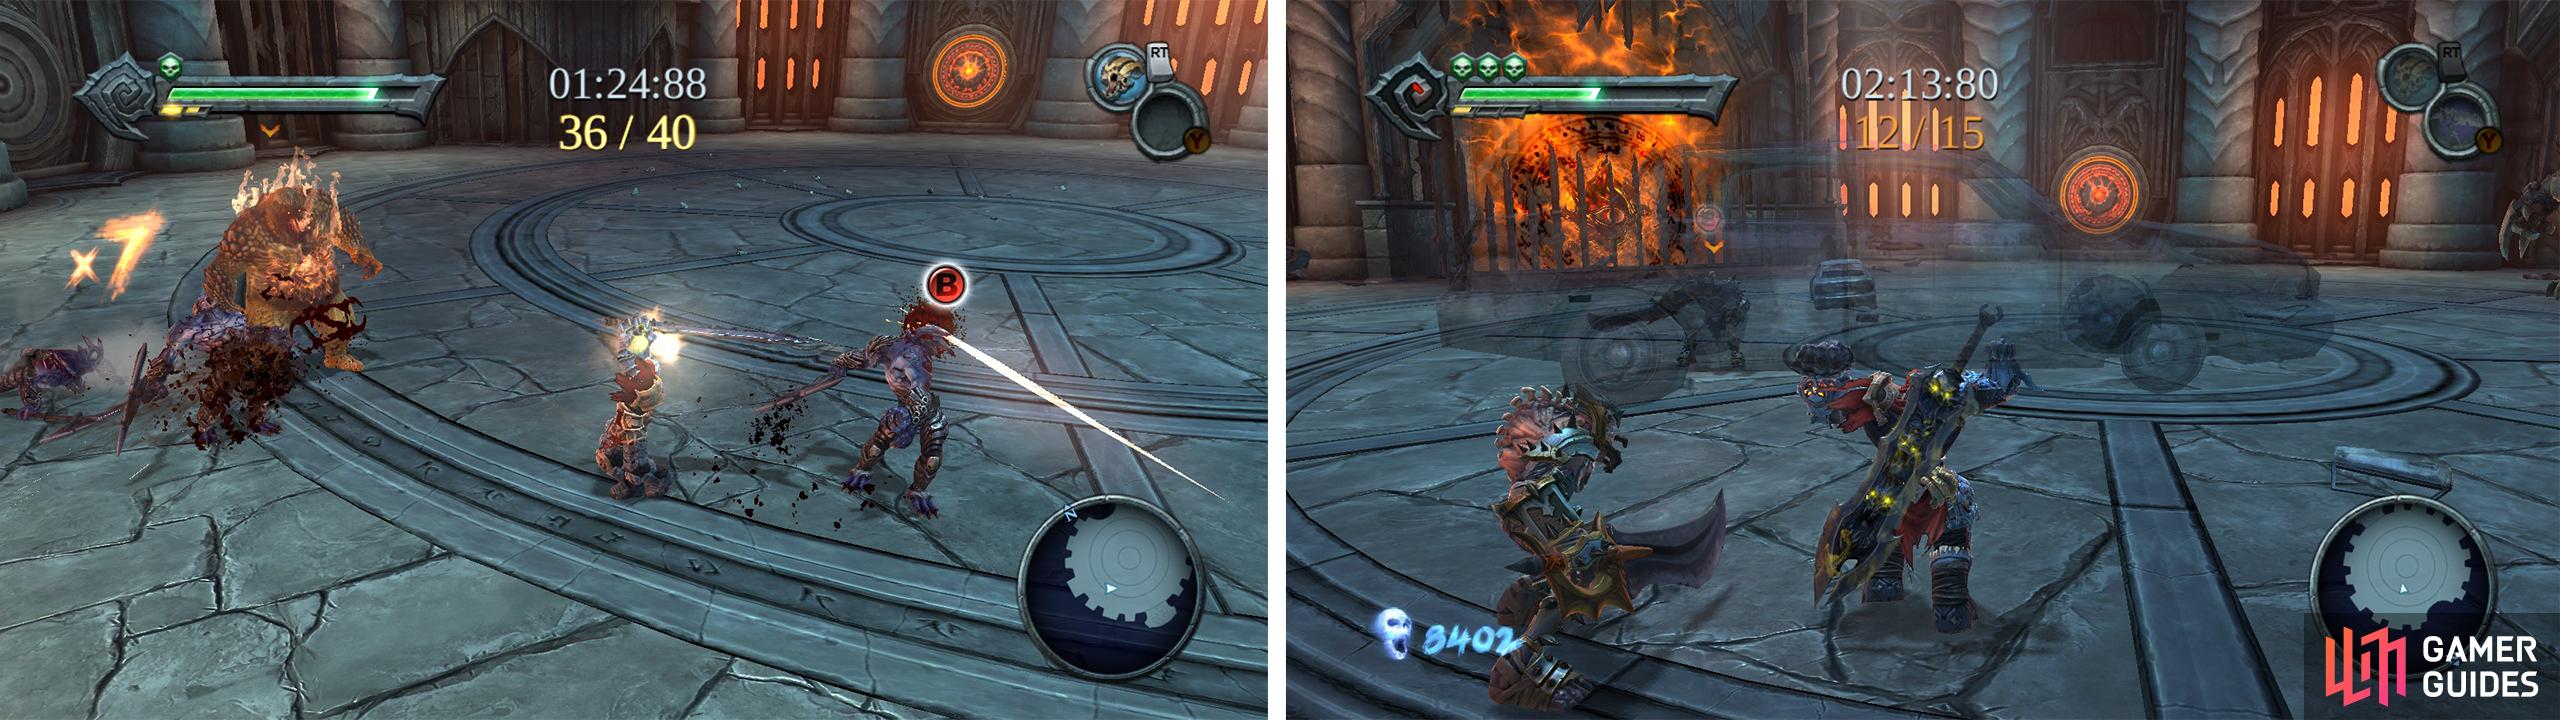 When enemy health is low, hit the button prompt to finish them! (left). You can use cars and other objects in the environment as projectile weapons (right).